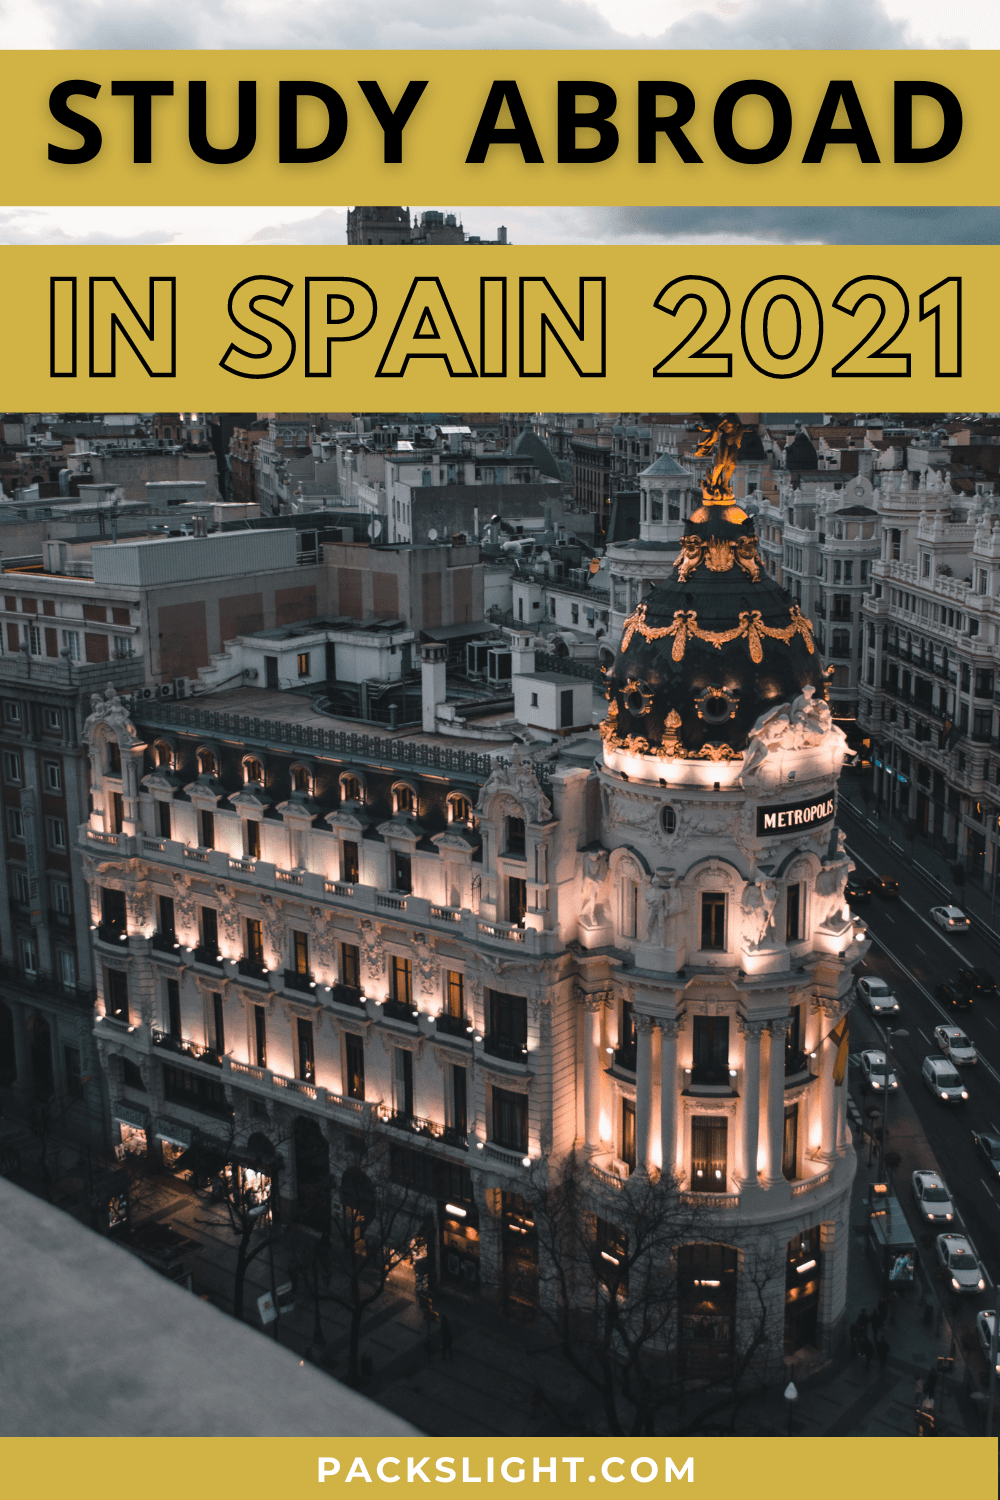 Find out 3 simple ways you can study abroad in Spain as an American student (maybe even for free, with study abroad scholarships!)